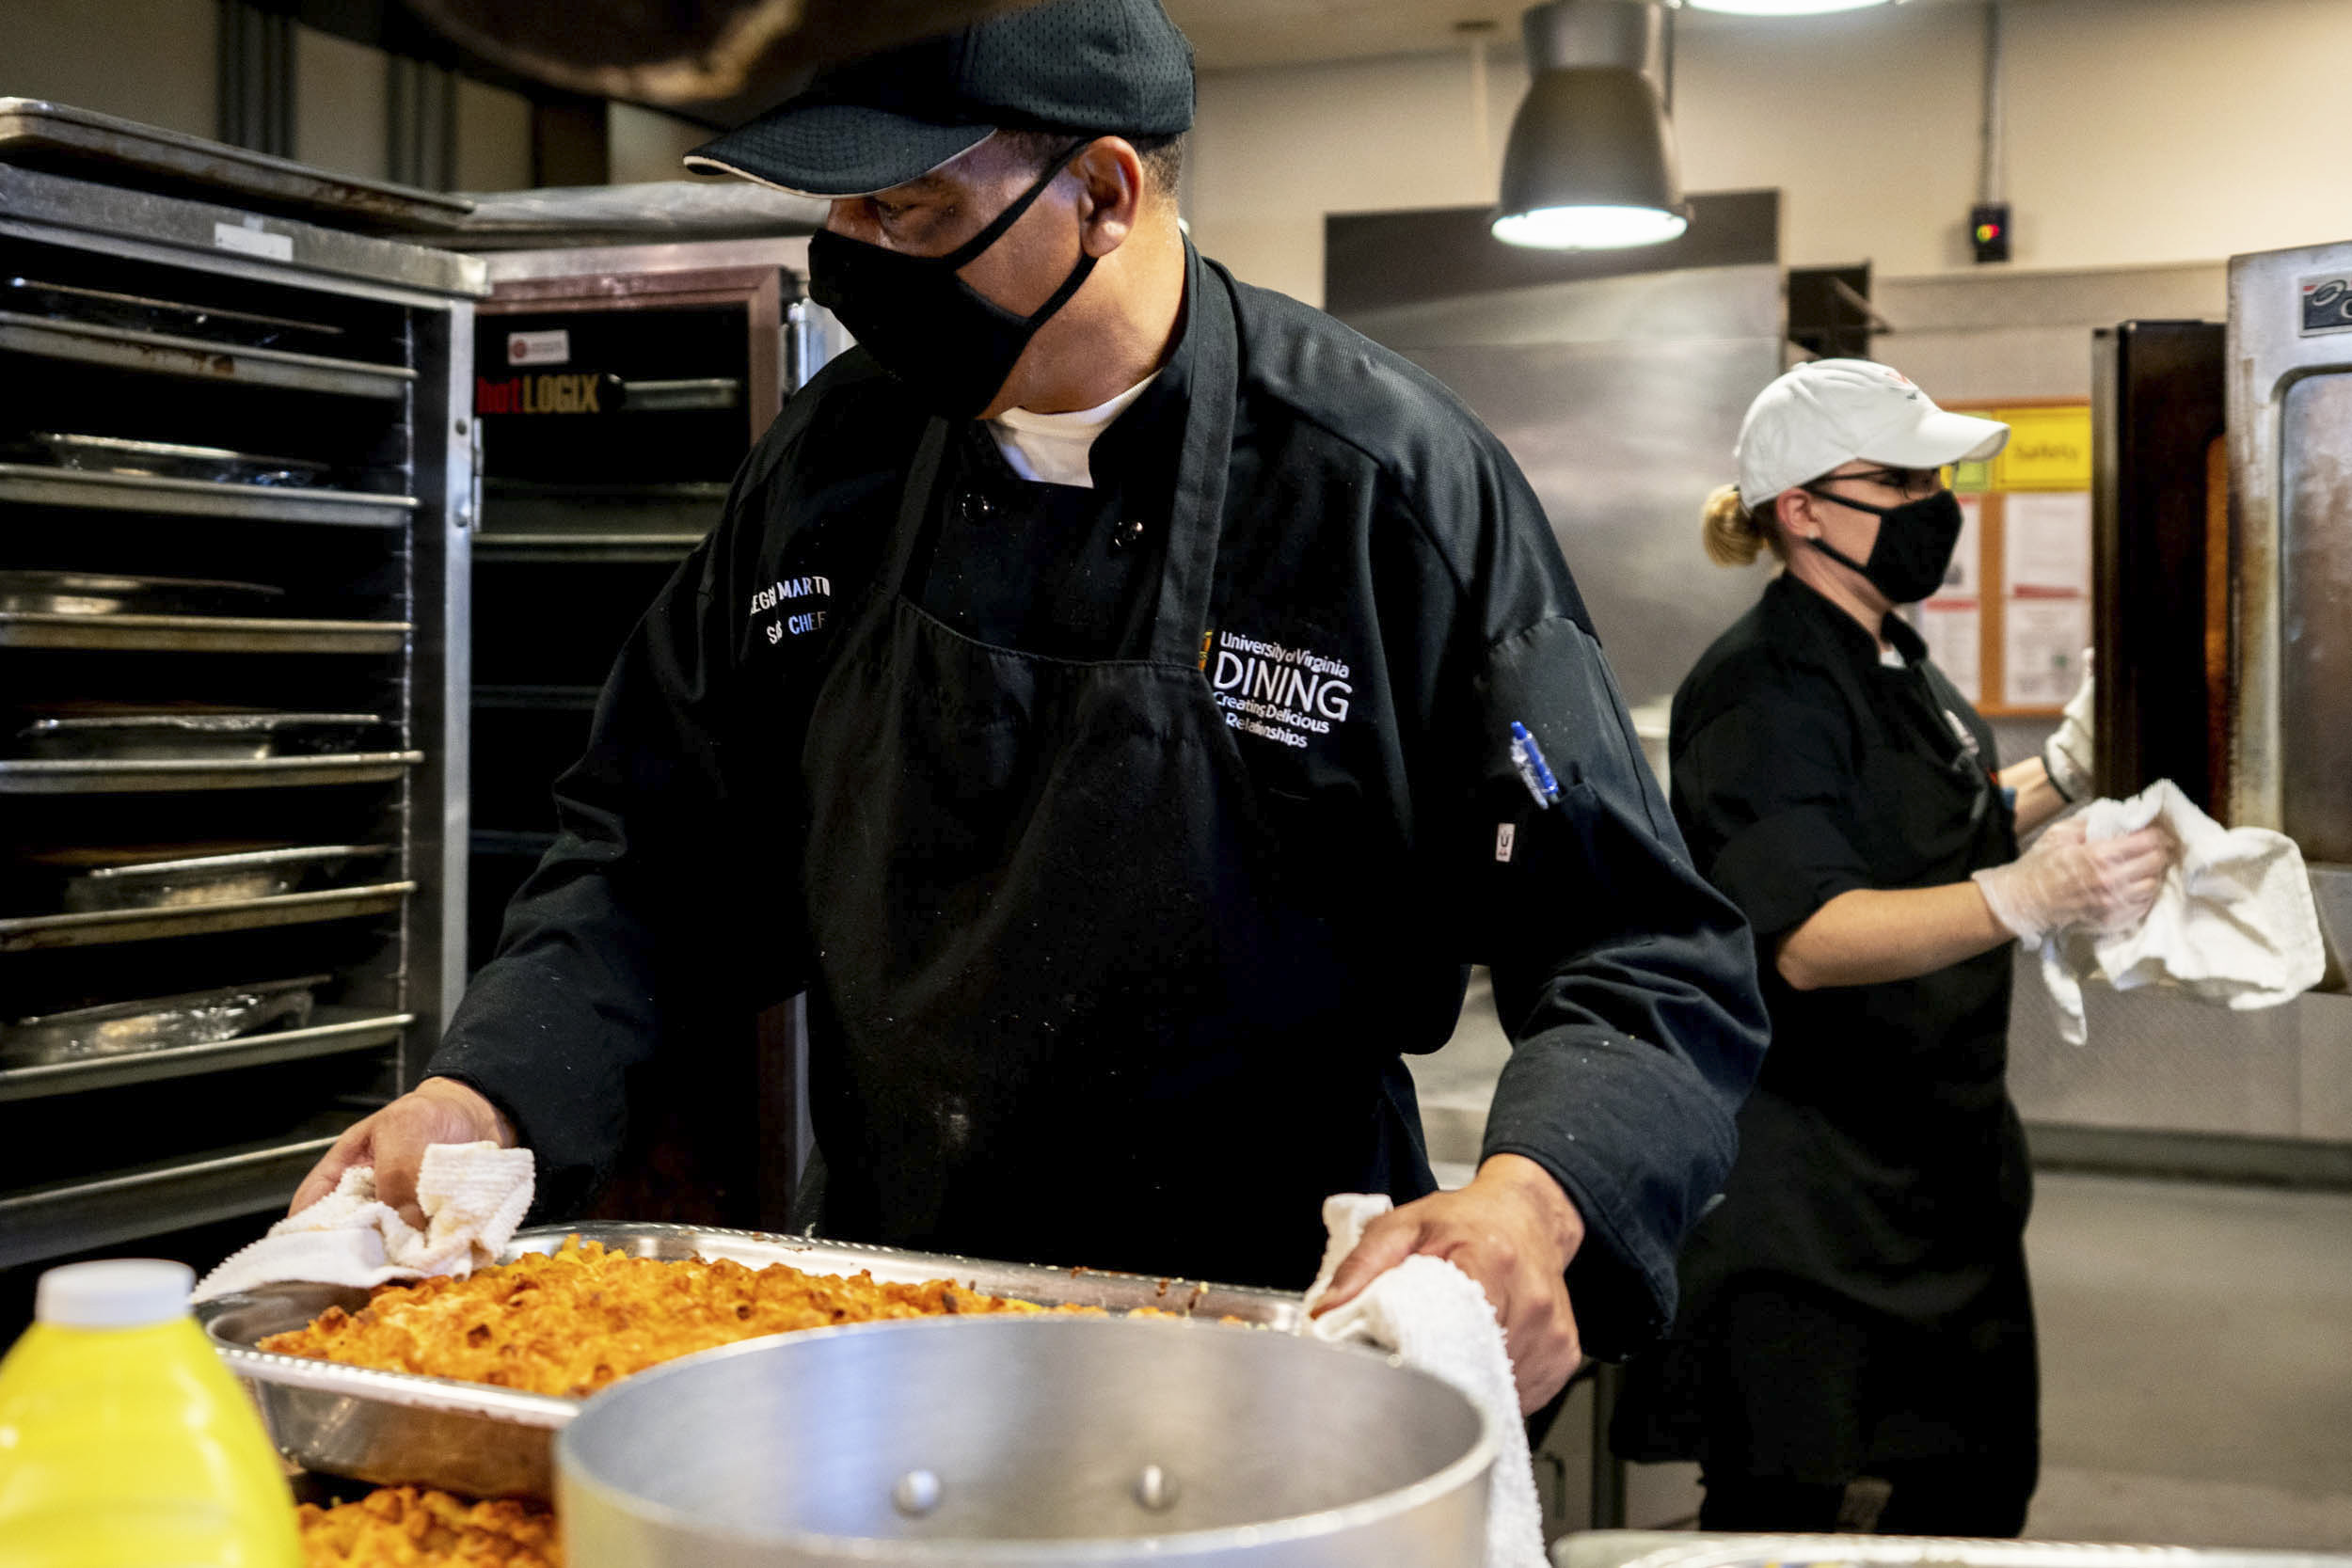 Food Service Workers preparing macaroni and cheese in large platters